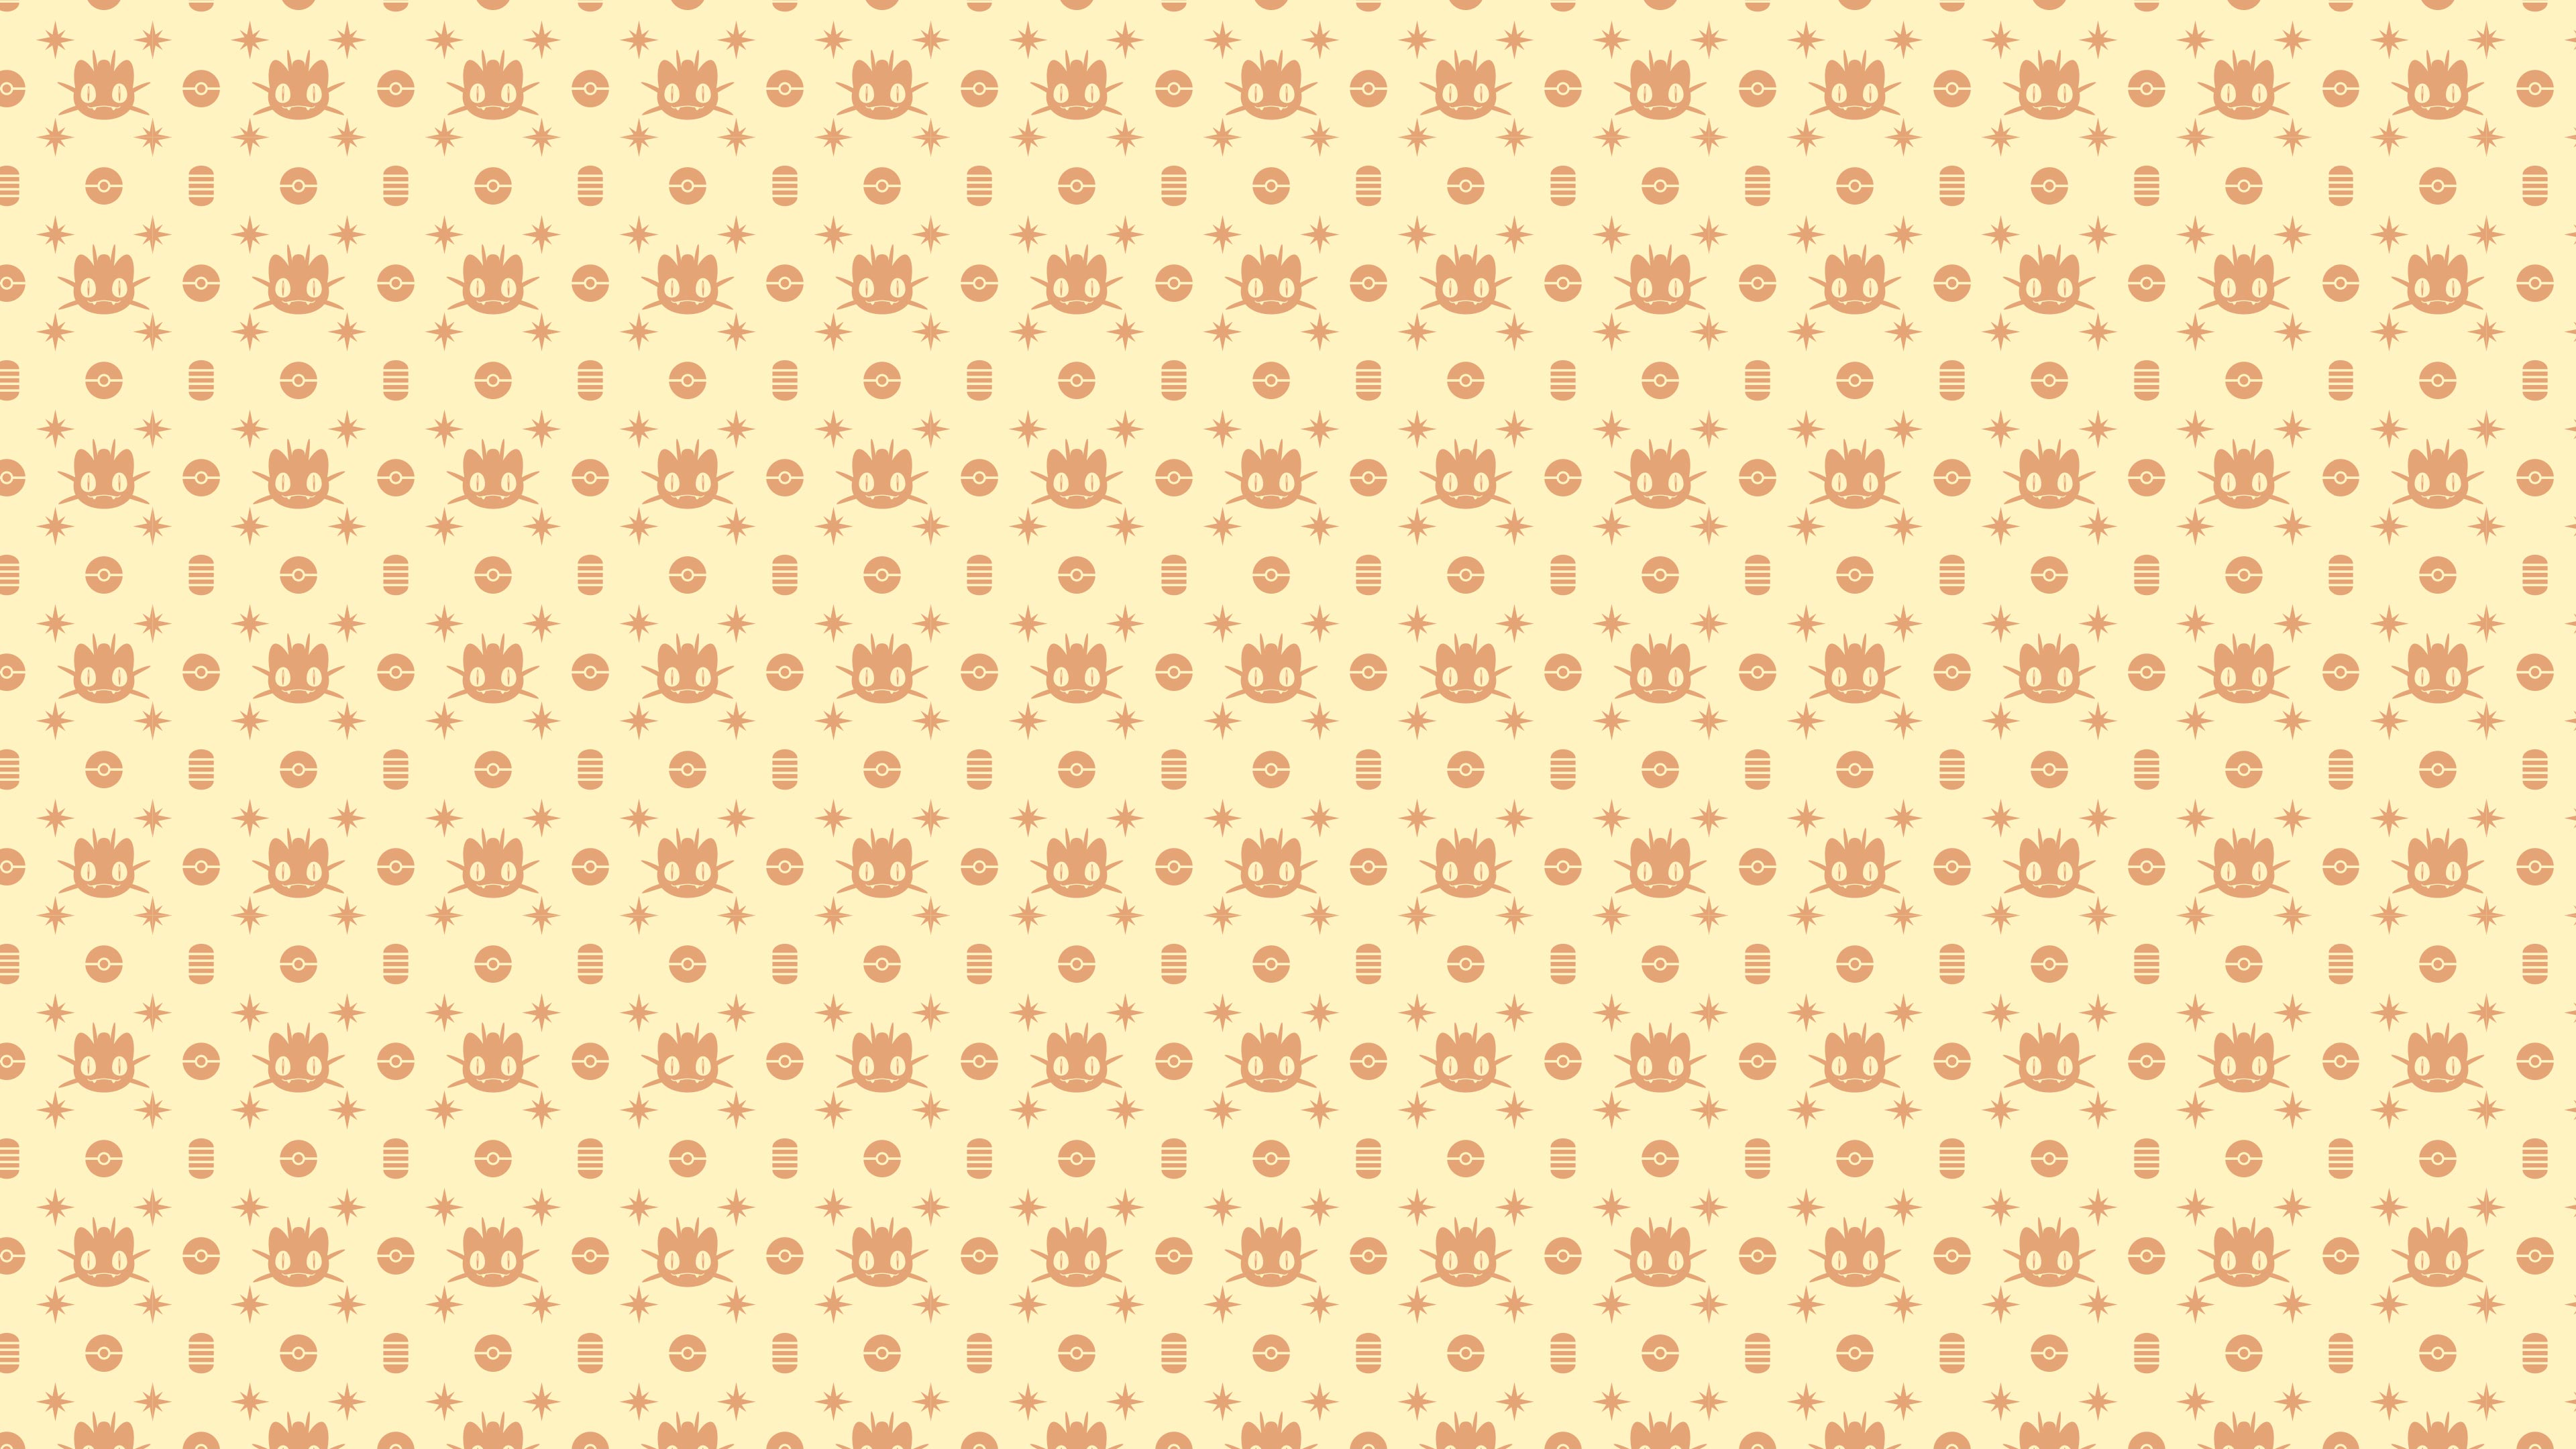 General 3840x2160 Pokémon pattern abstract simple background Meowth